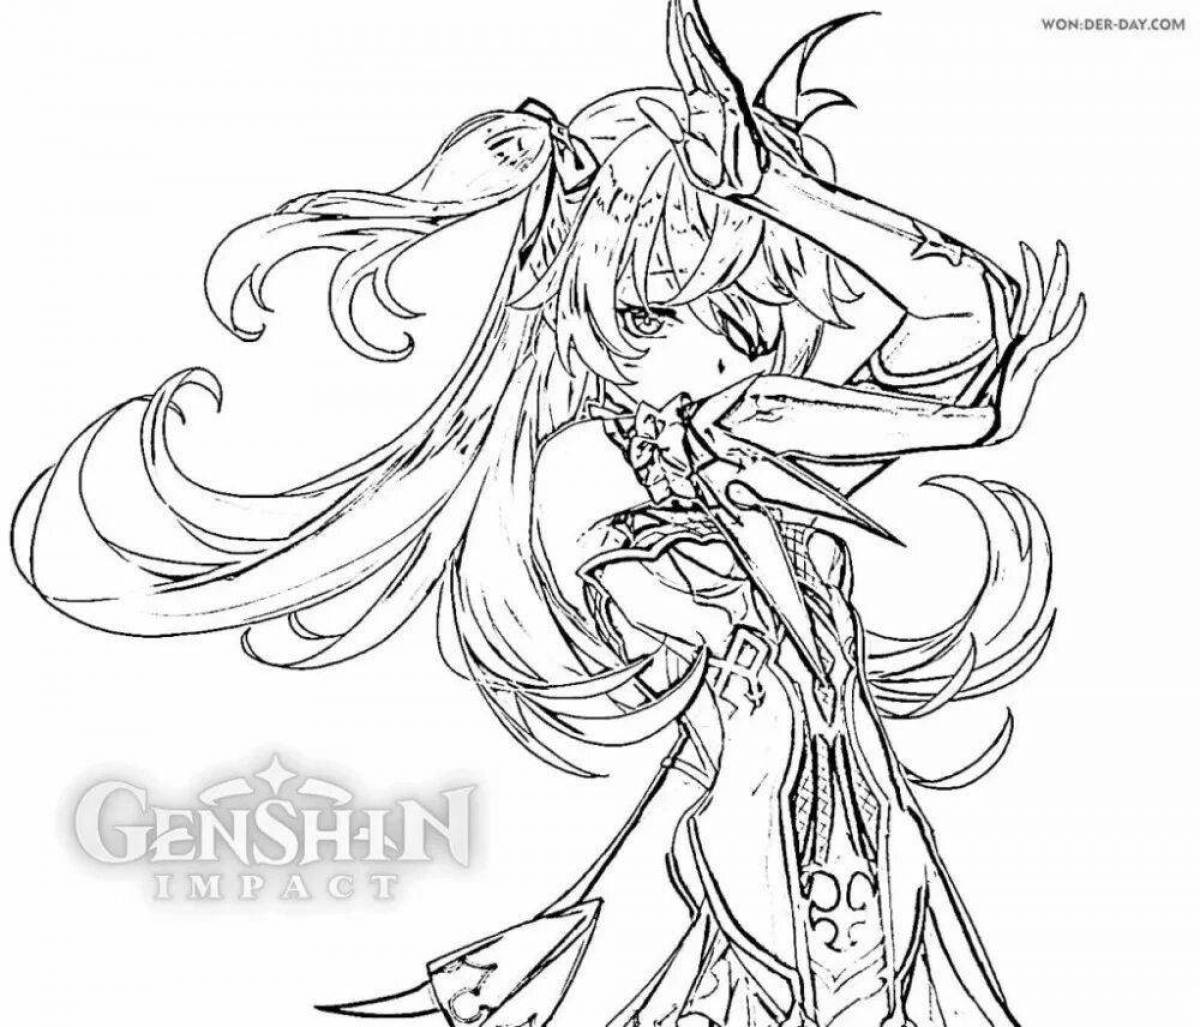 Radiant genshin impact coloring page